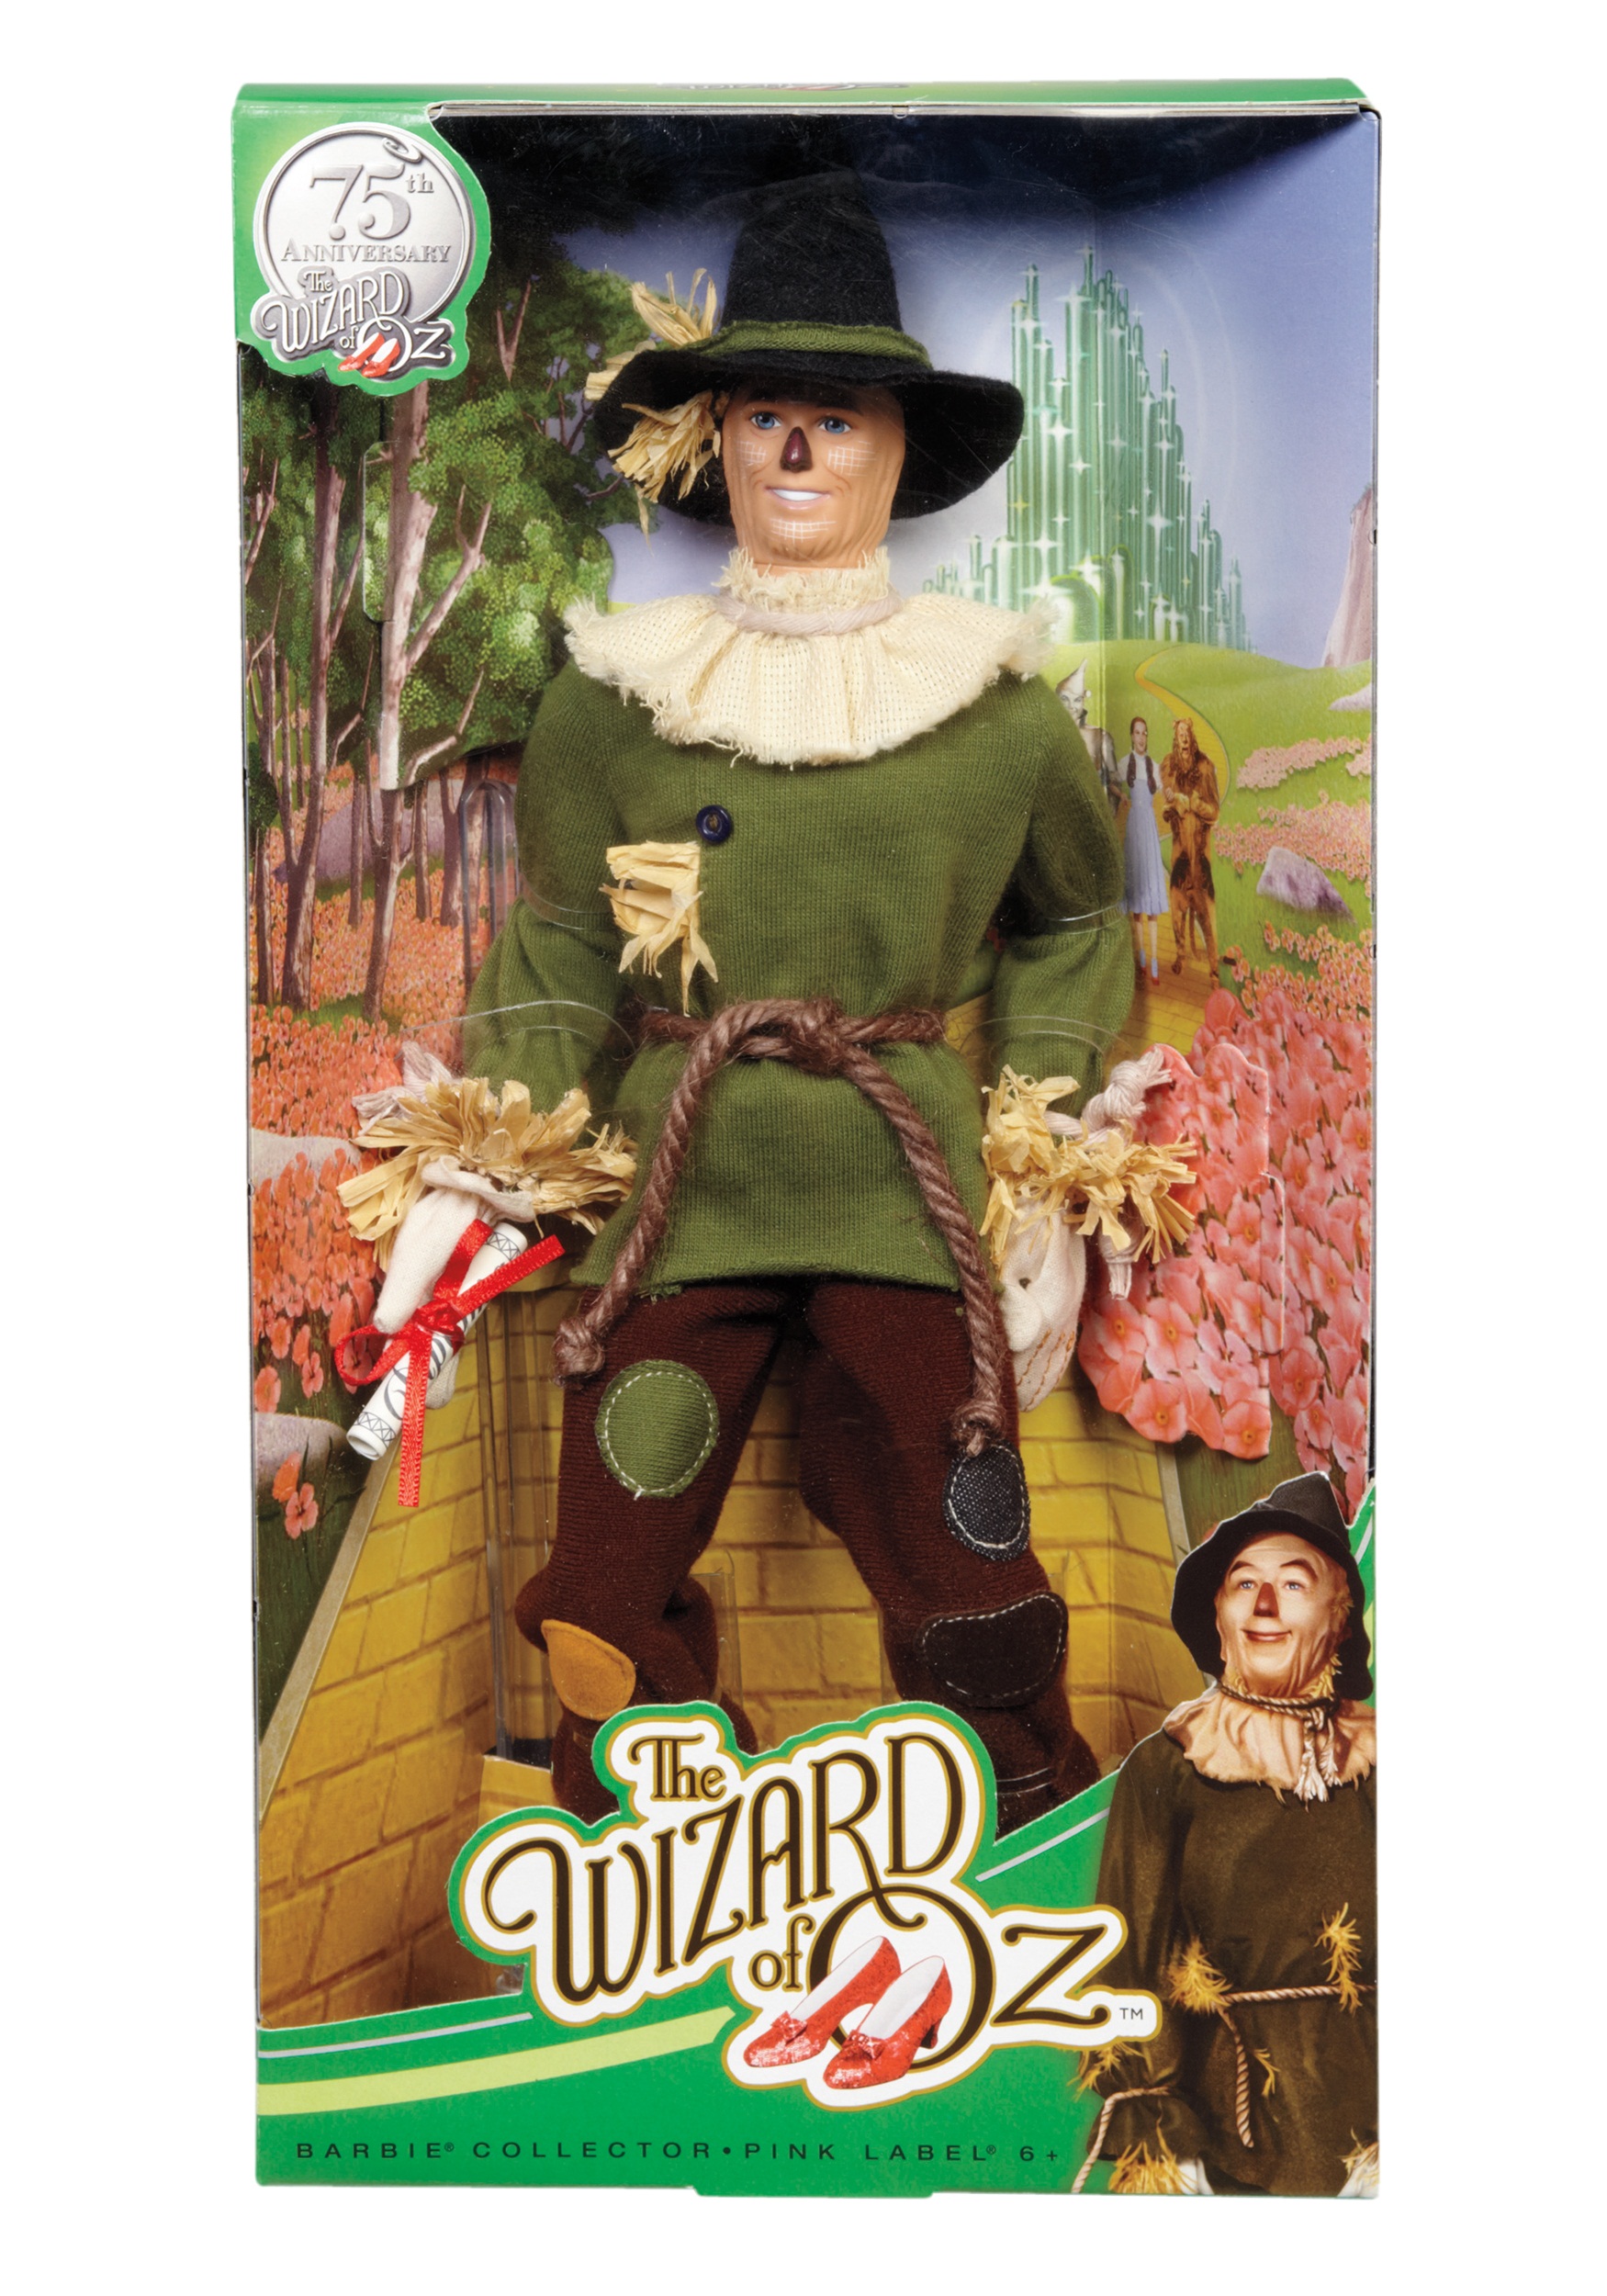 The wizard of oz slots